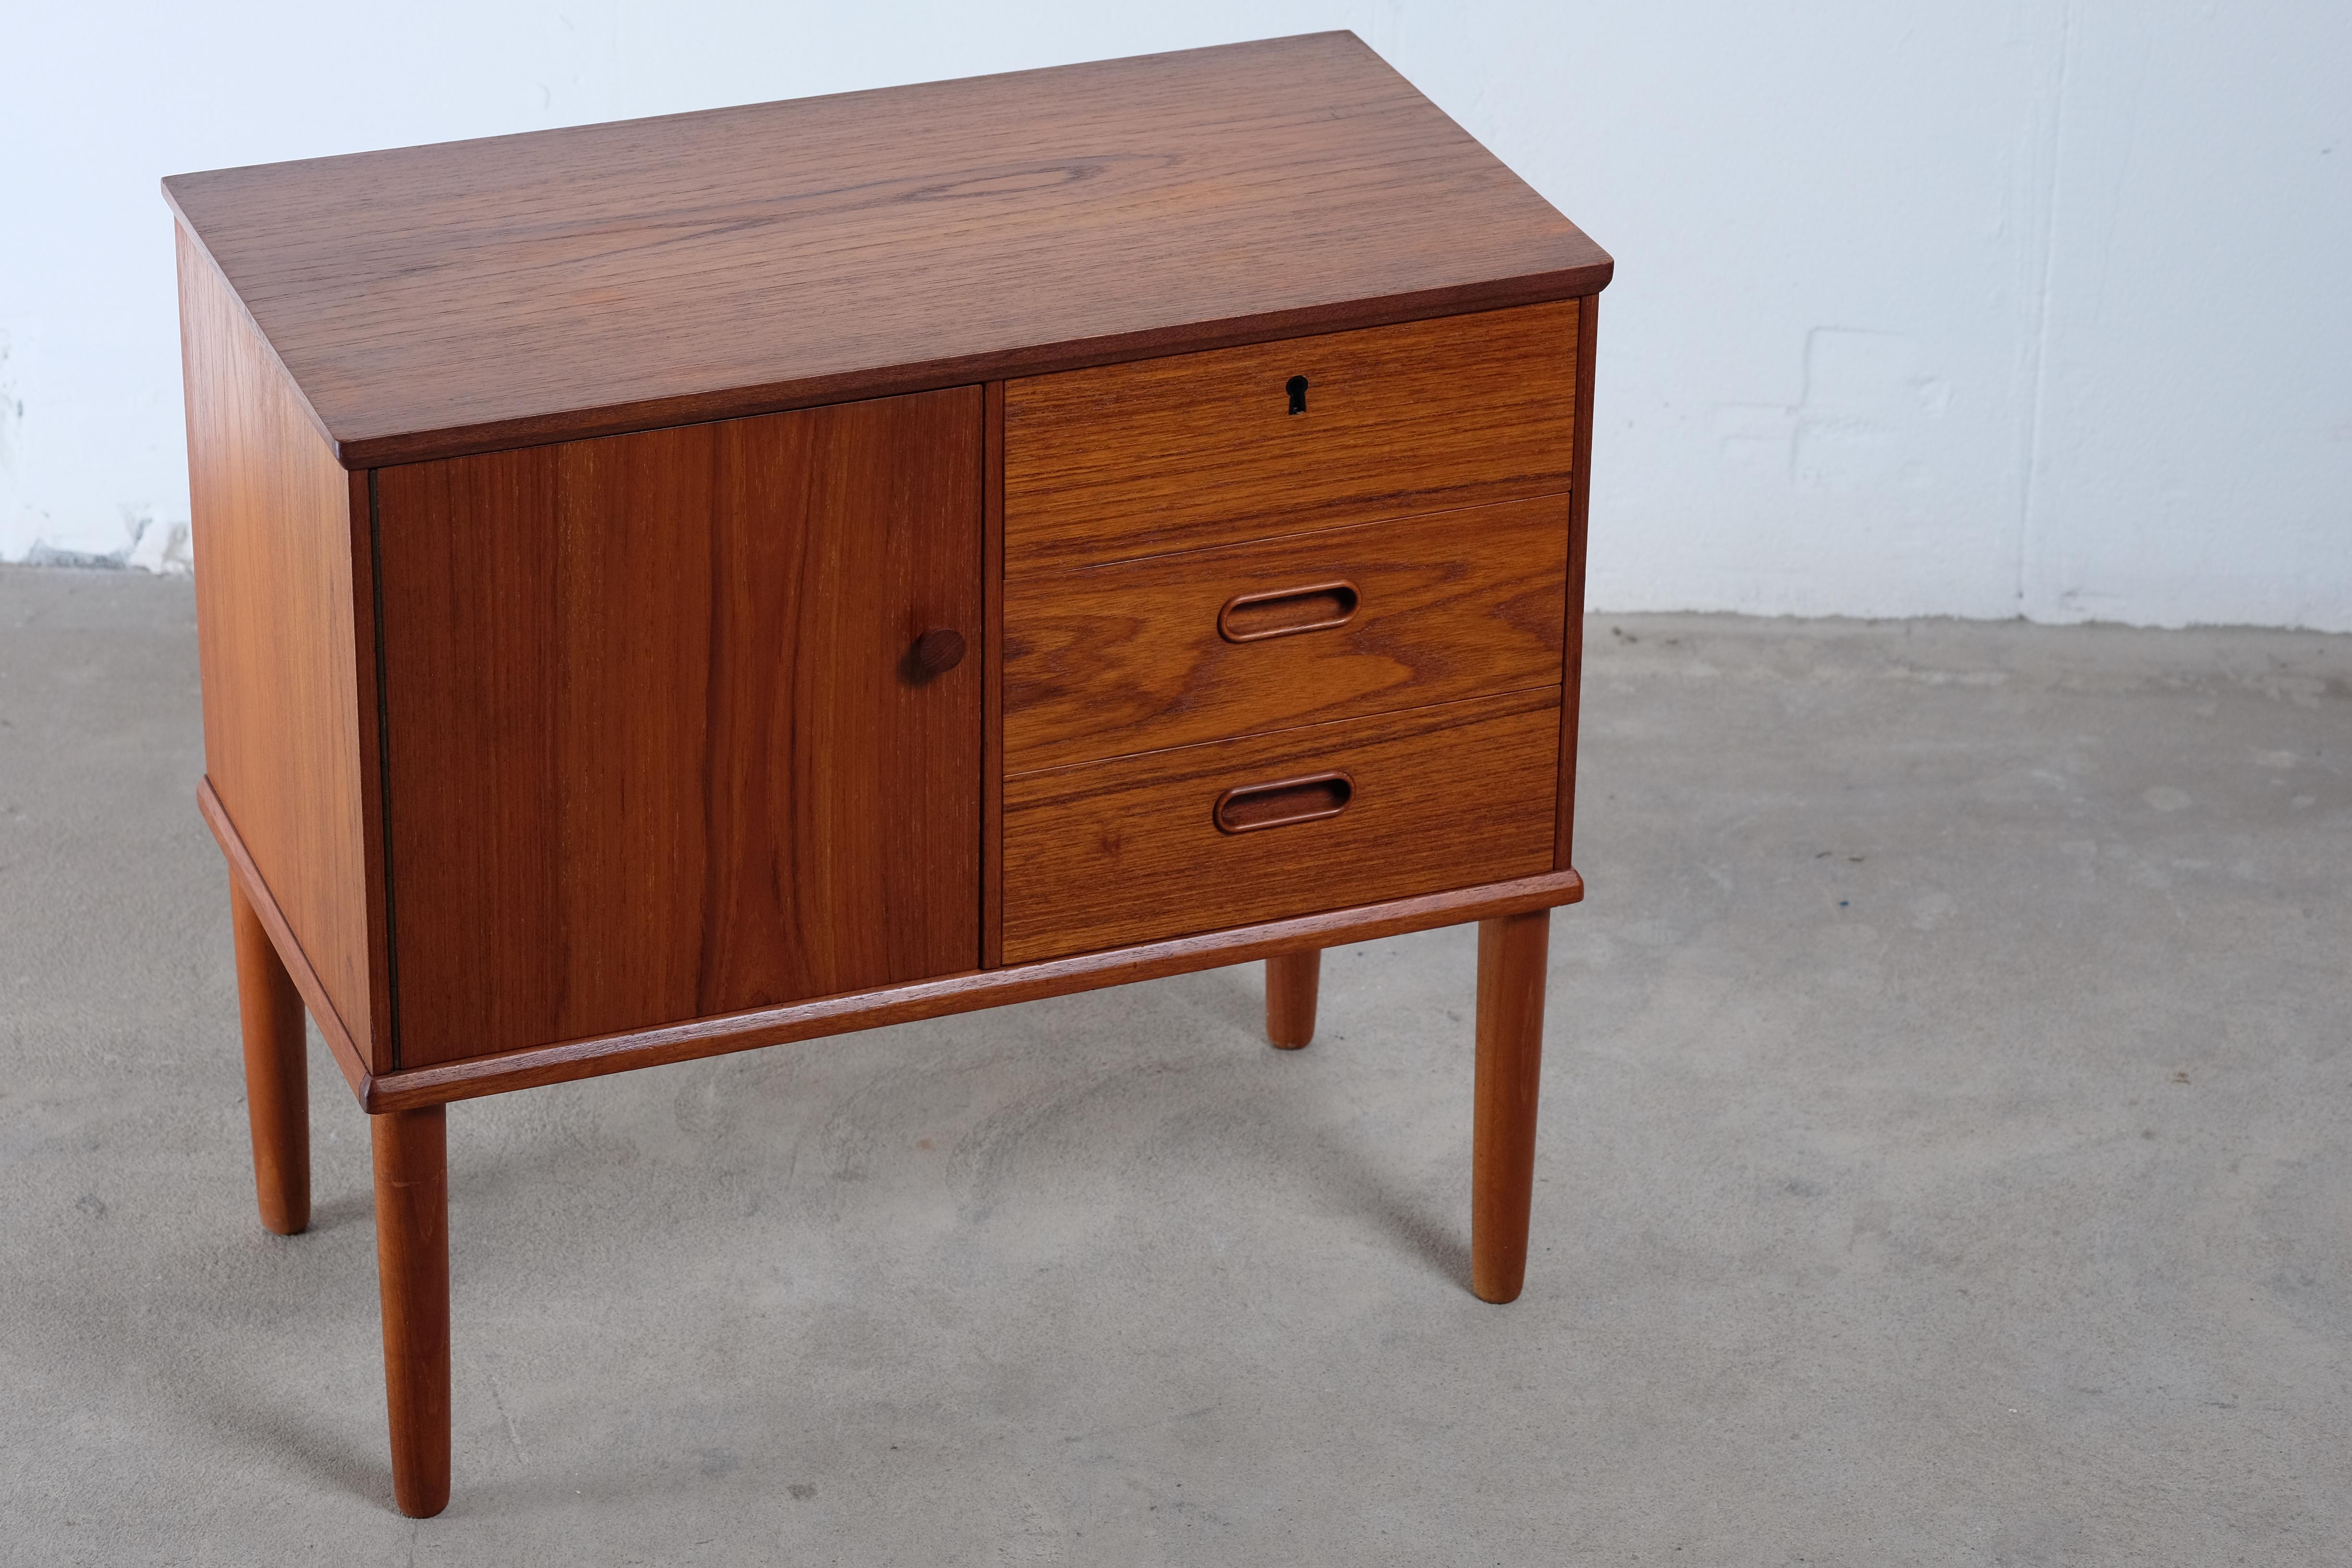 Small sideboard in teak features a door with storage room and 3 drawers.
Perfect for the hallway or as a TV furniture.
This piece would be a unique addition to any modern environment, it's in great vintage condition with few signs of wear.